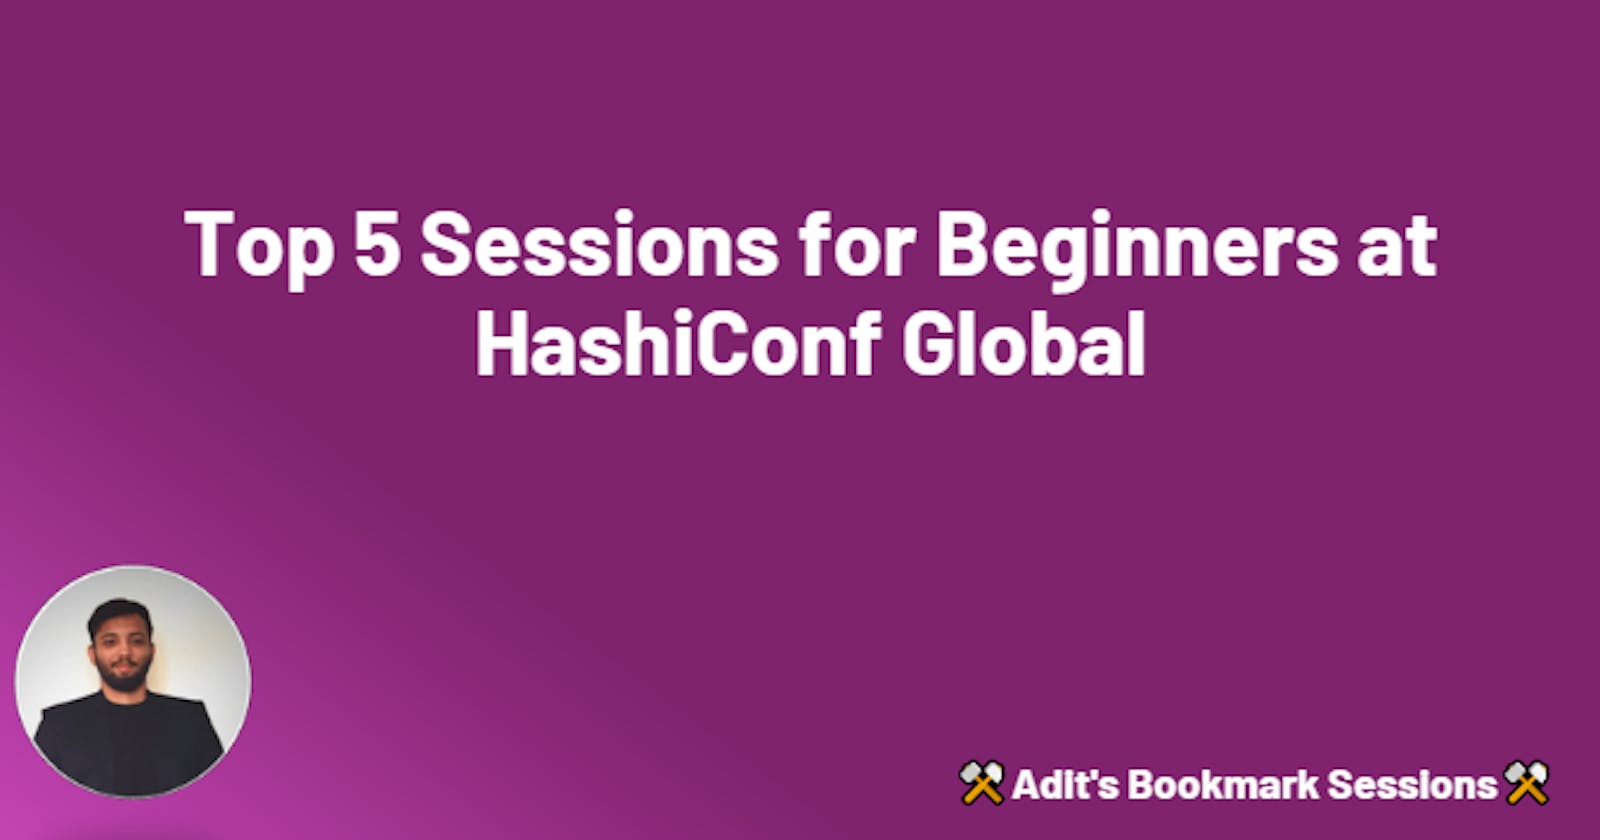 Top 5 Sessions for Beginners at HashiConf Global